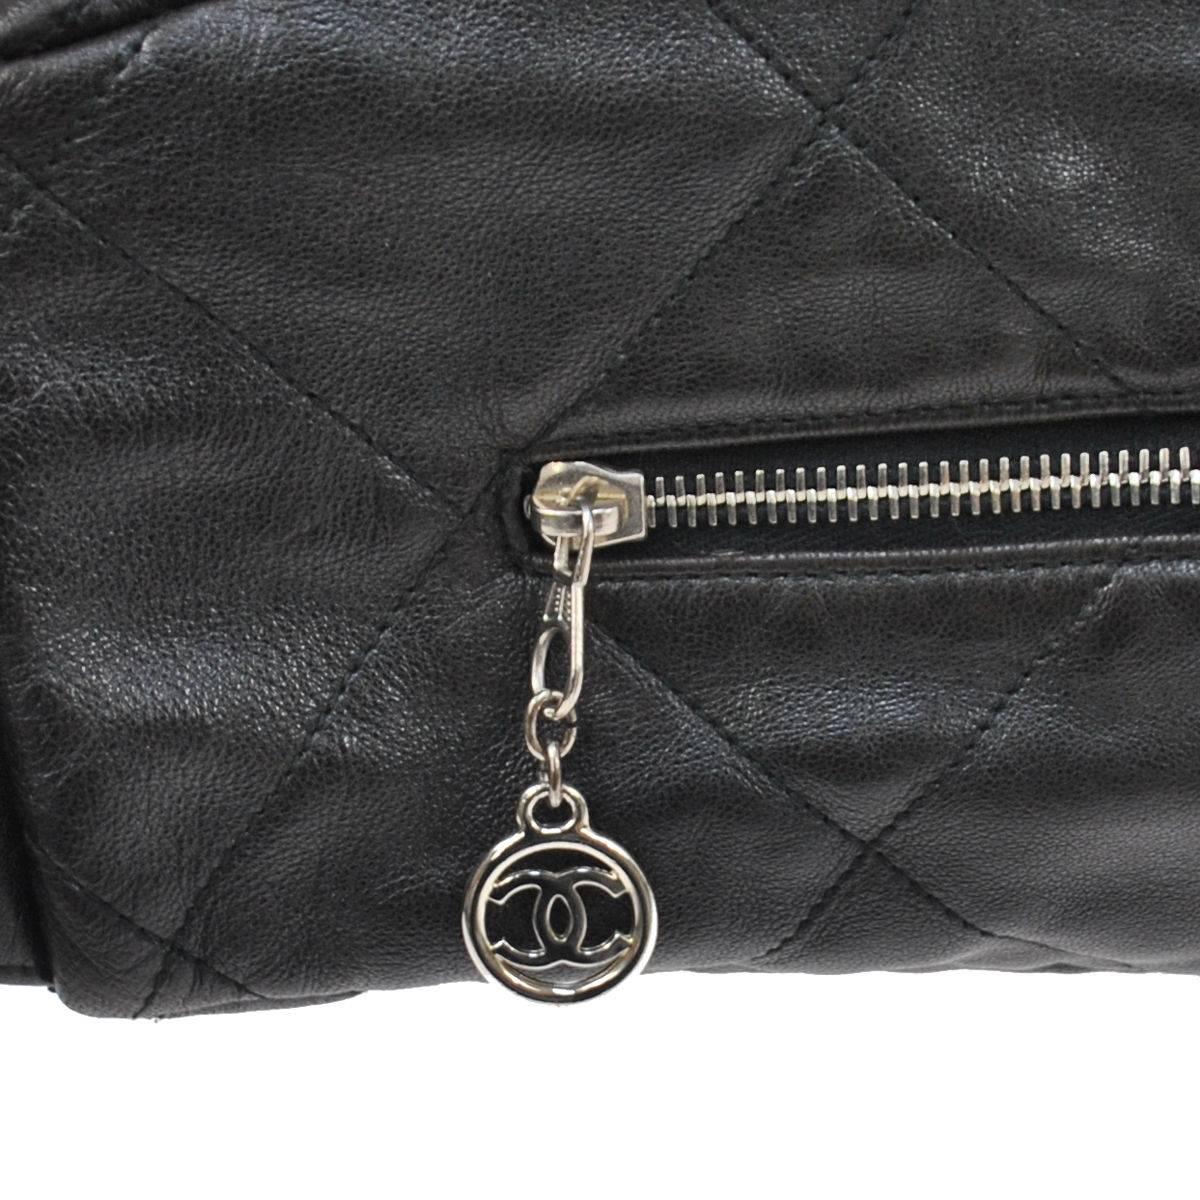 Chanel Black Leather Large Carryall Travel Top Handle Tote Bag In Good Condition In Chicago, IL